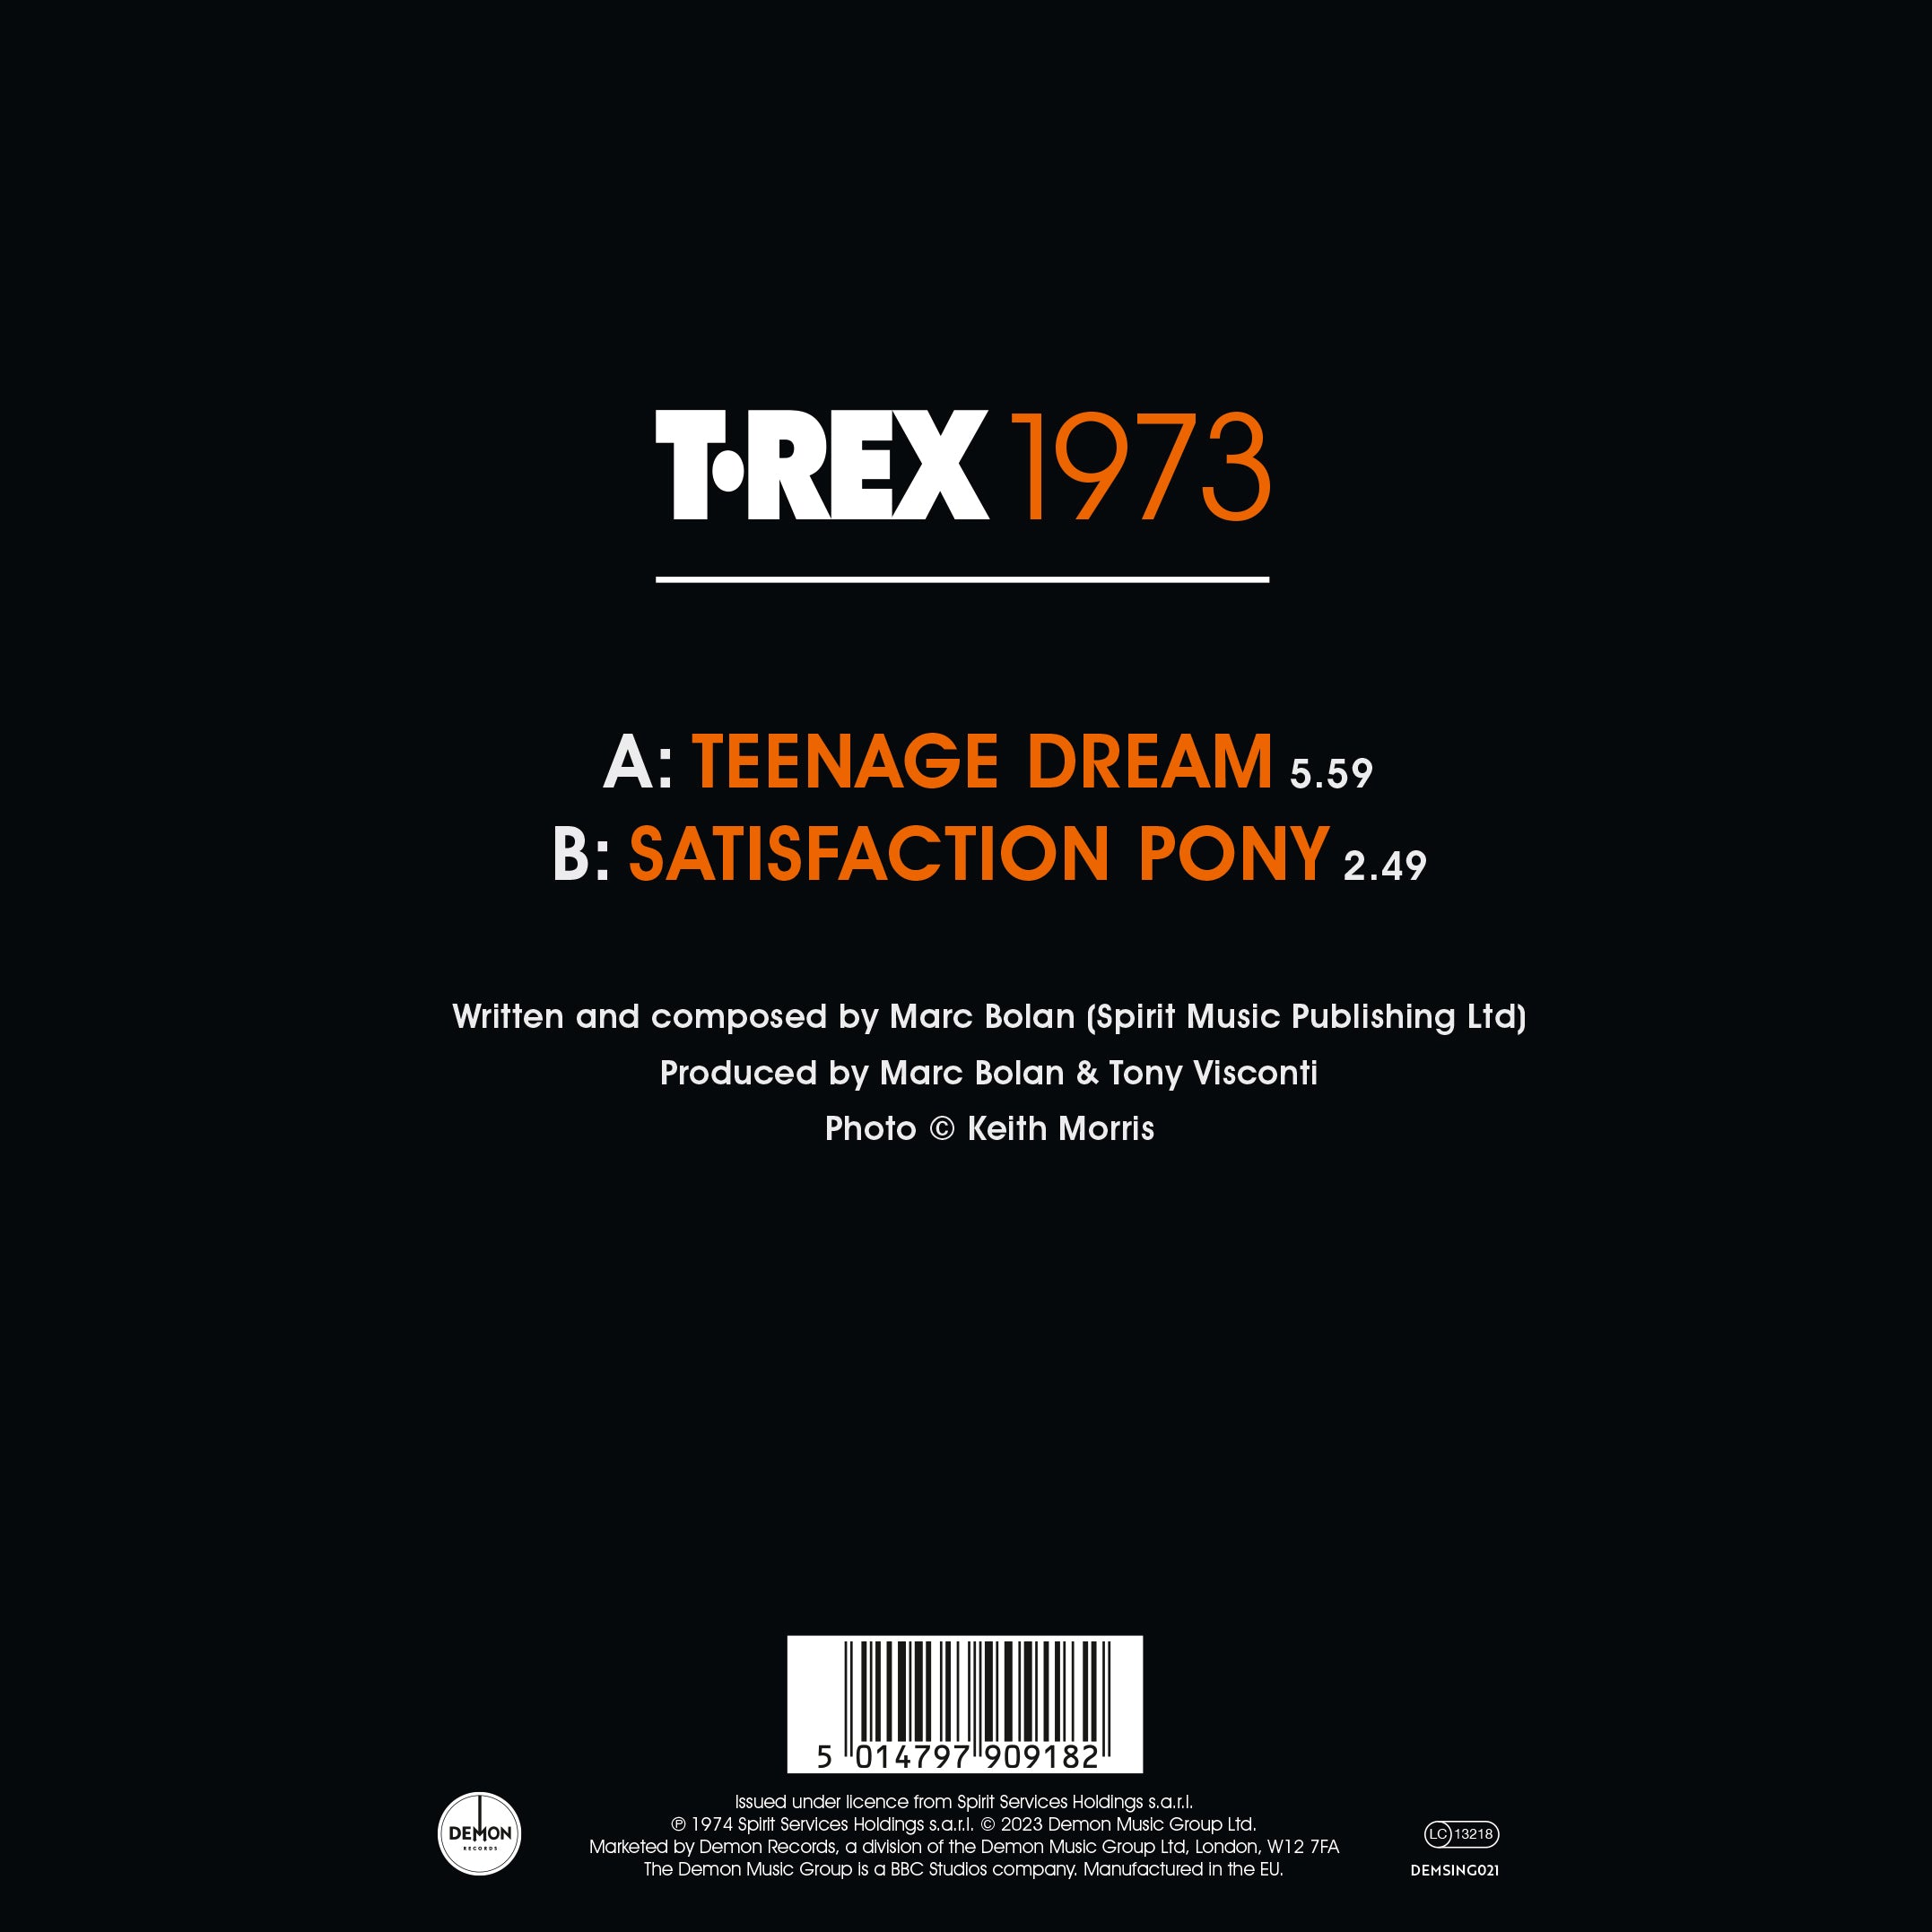 T. Rex - Teenage Dream (50th Anniversary): Limited Vinyl 7" Picture Disc